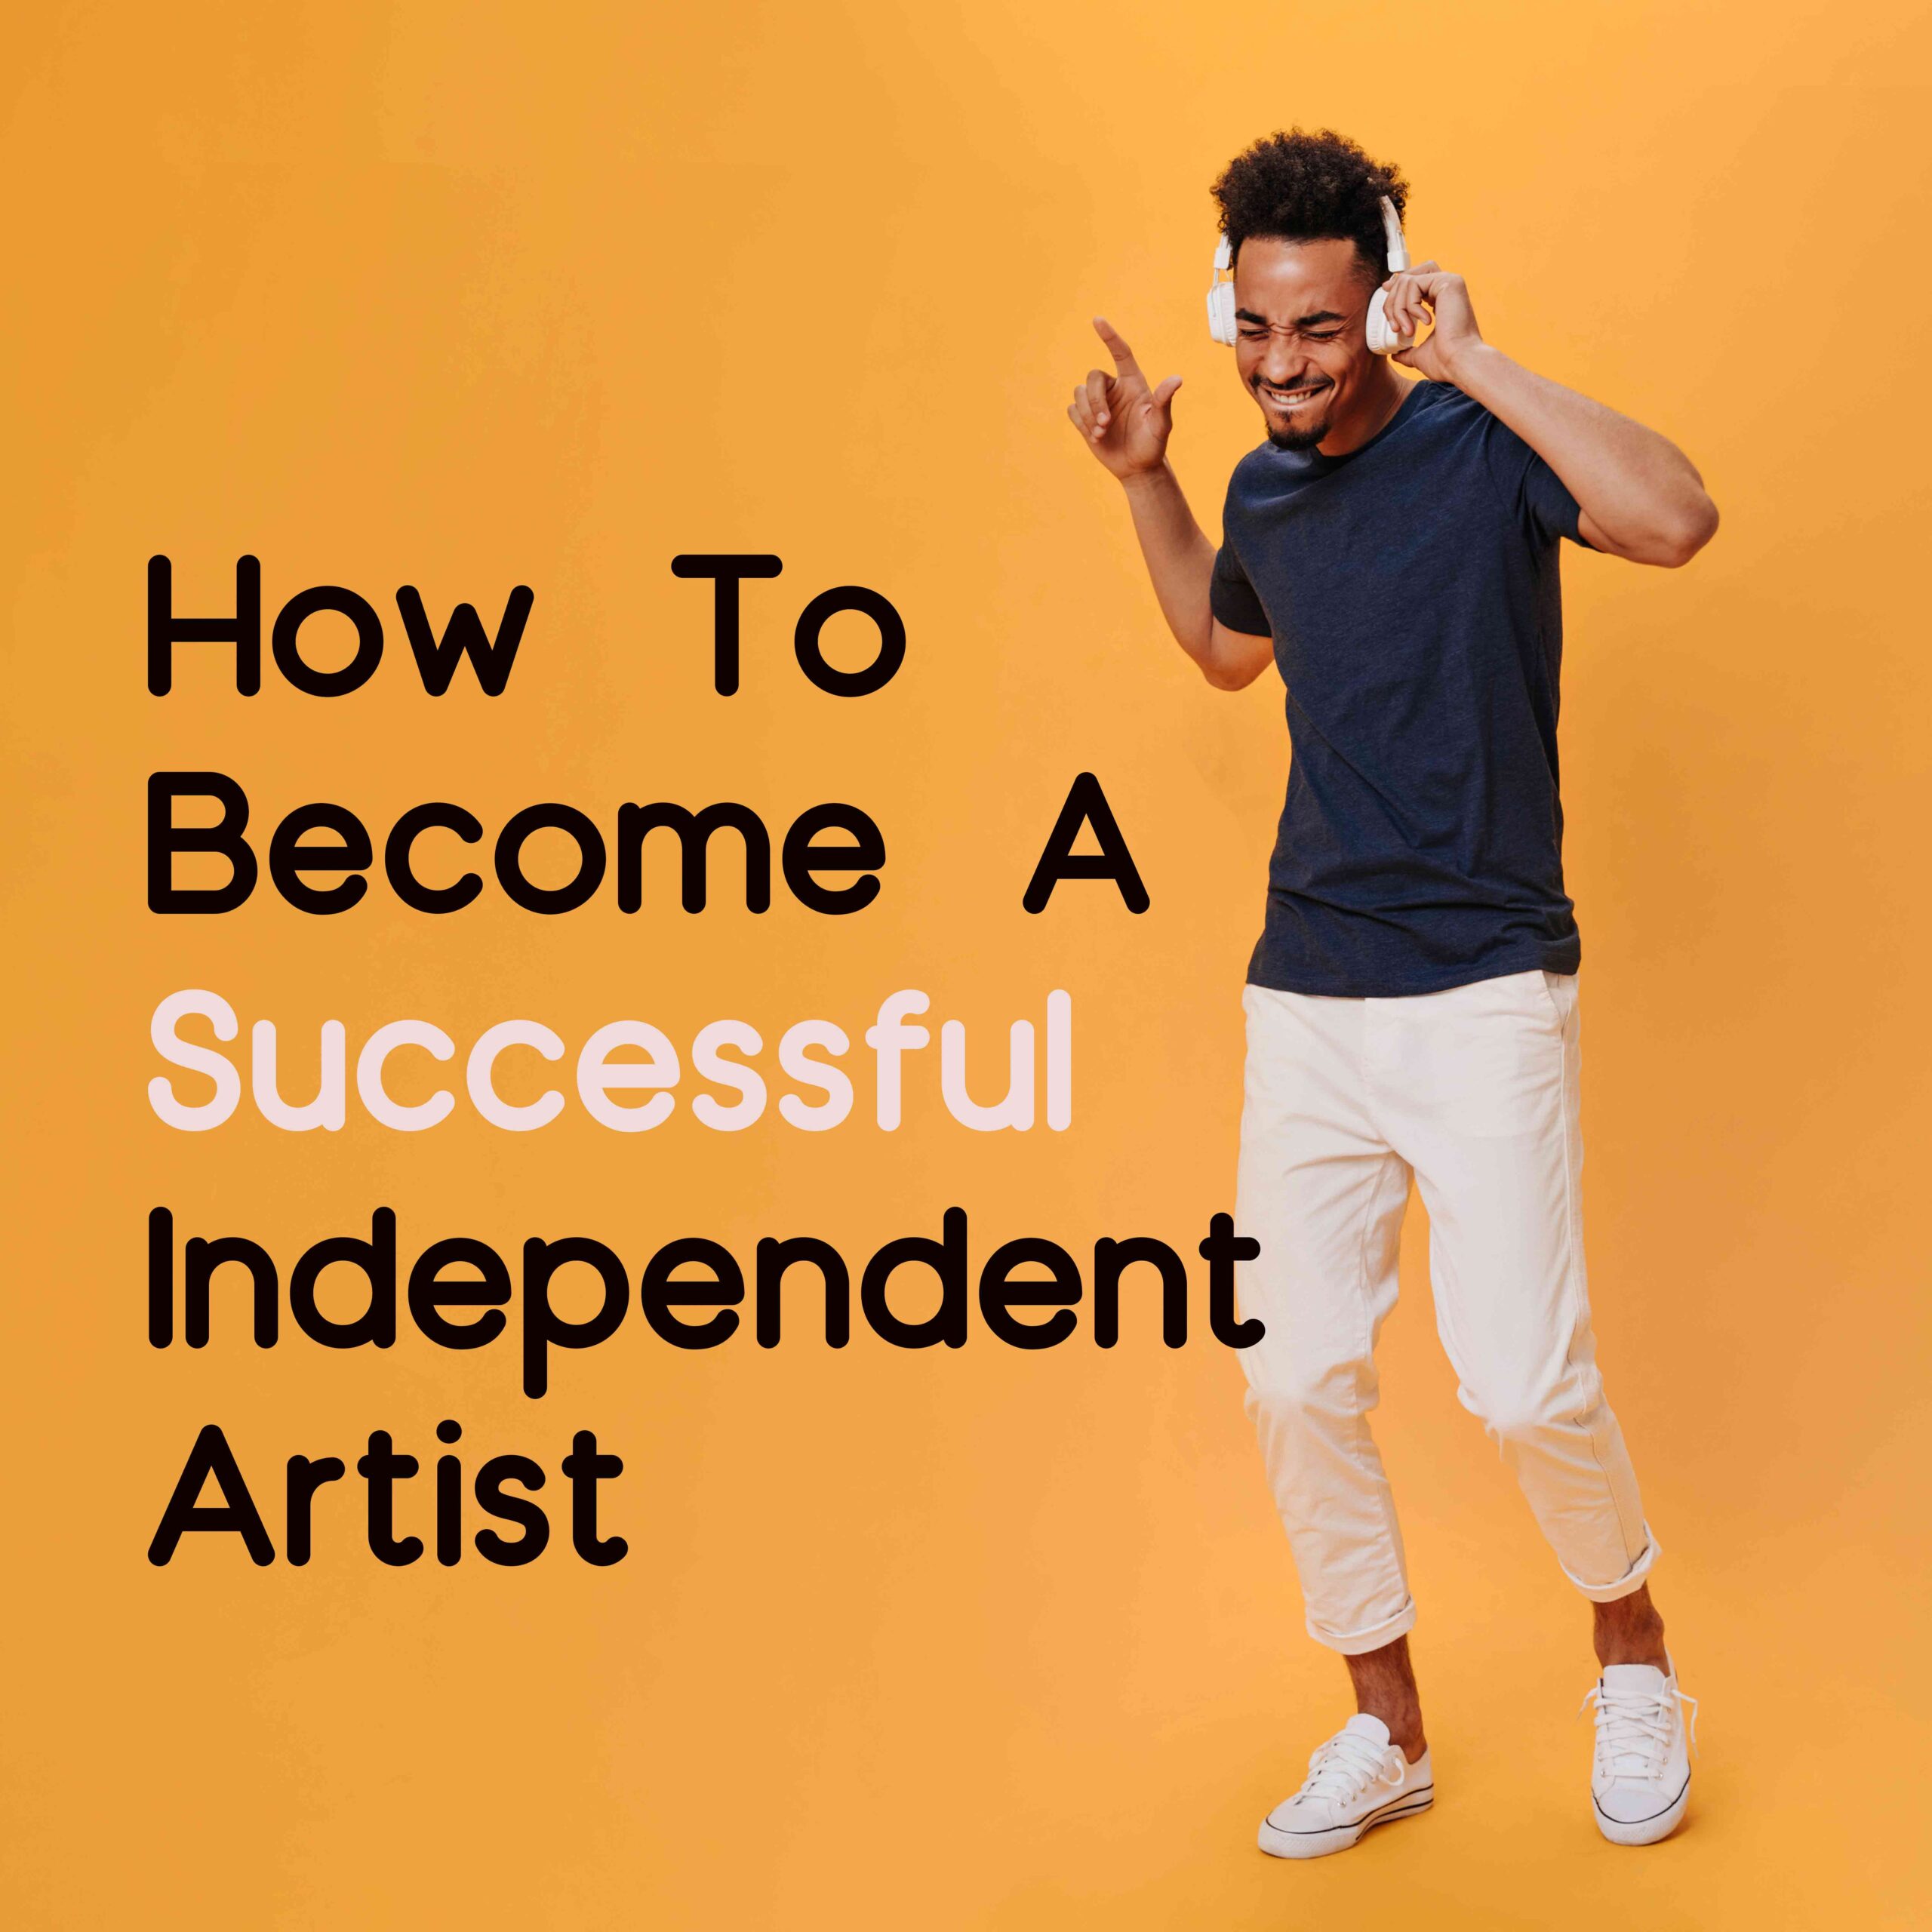 How To Become A Successful Independent Artist